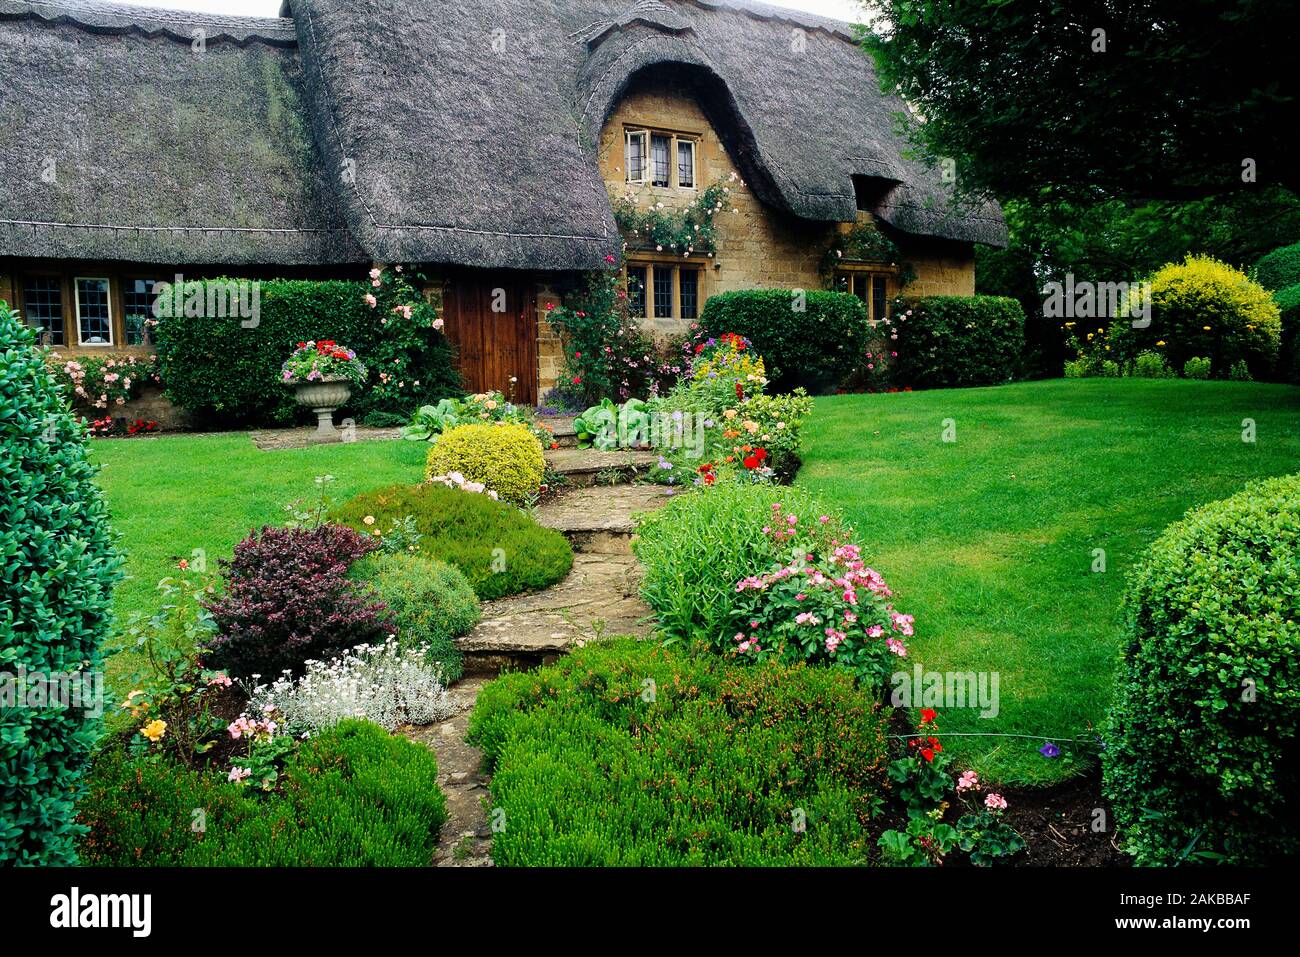 Thatched roof cottage with flowers in garden, Cotswolds, England, UK Stock Photo